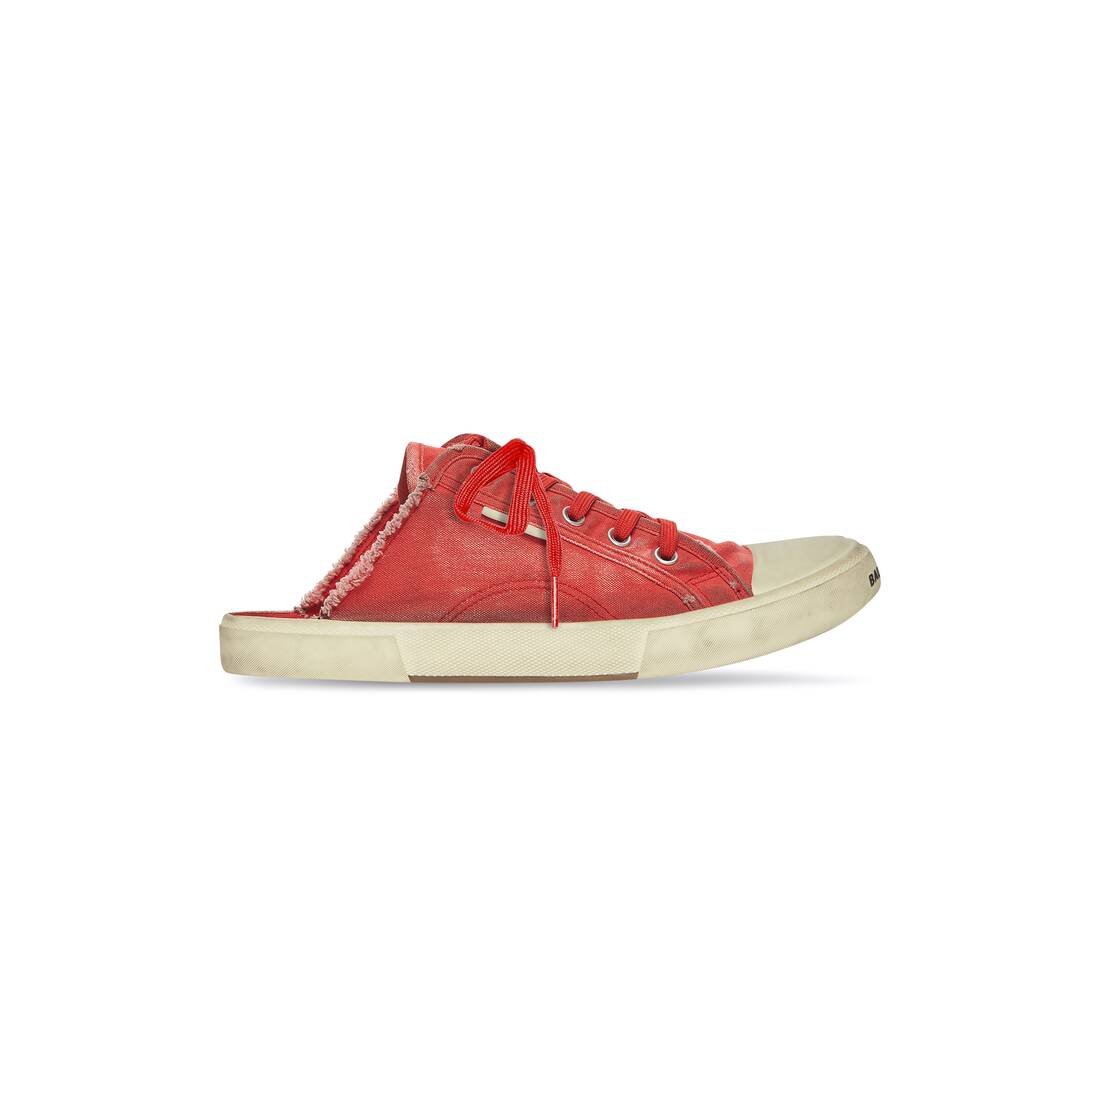 Paris Sneaker Mule in red destroyed knit and white rubber